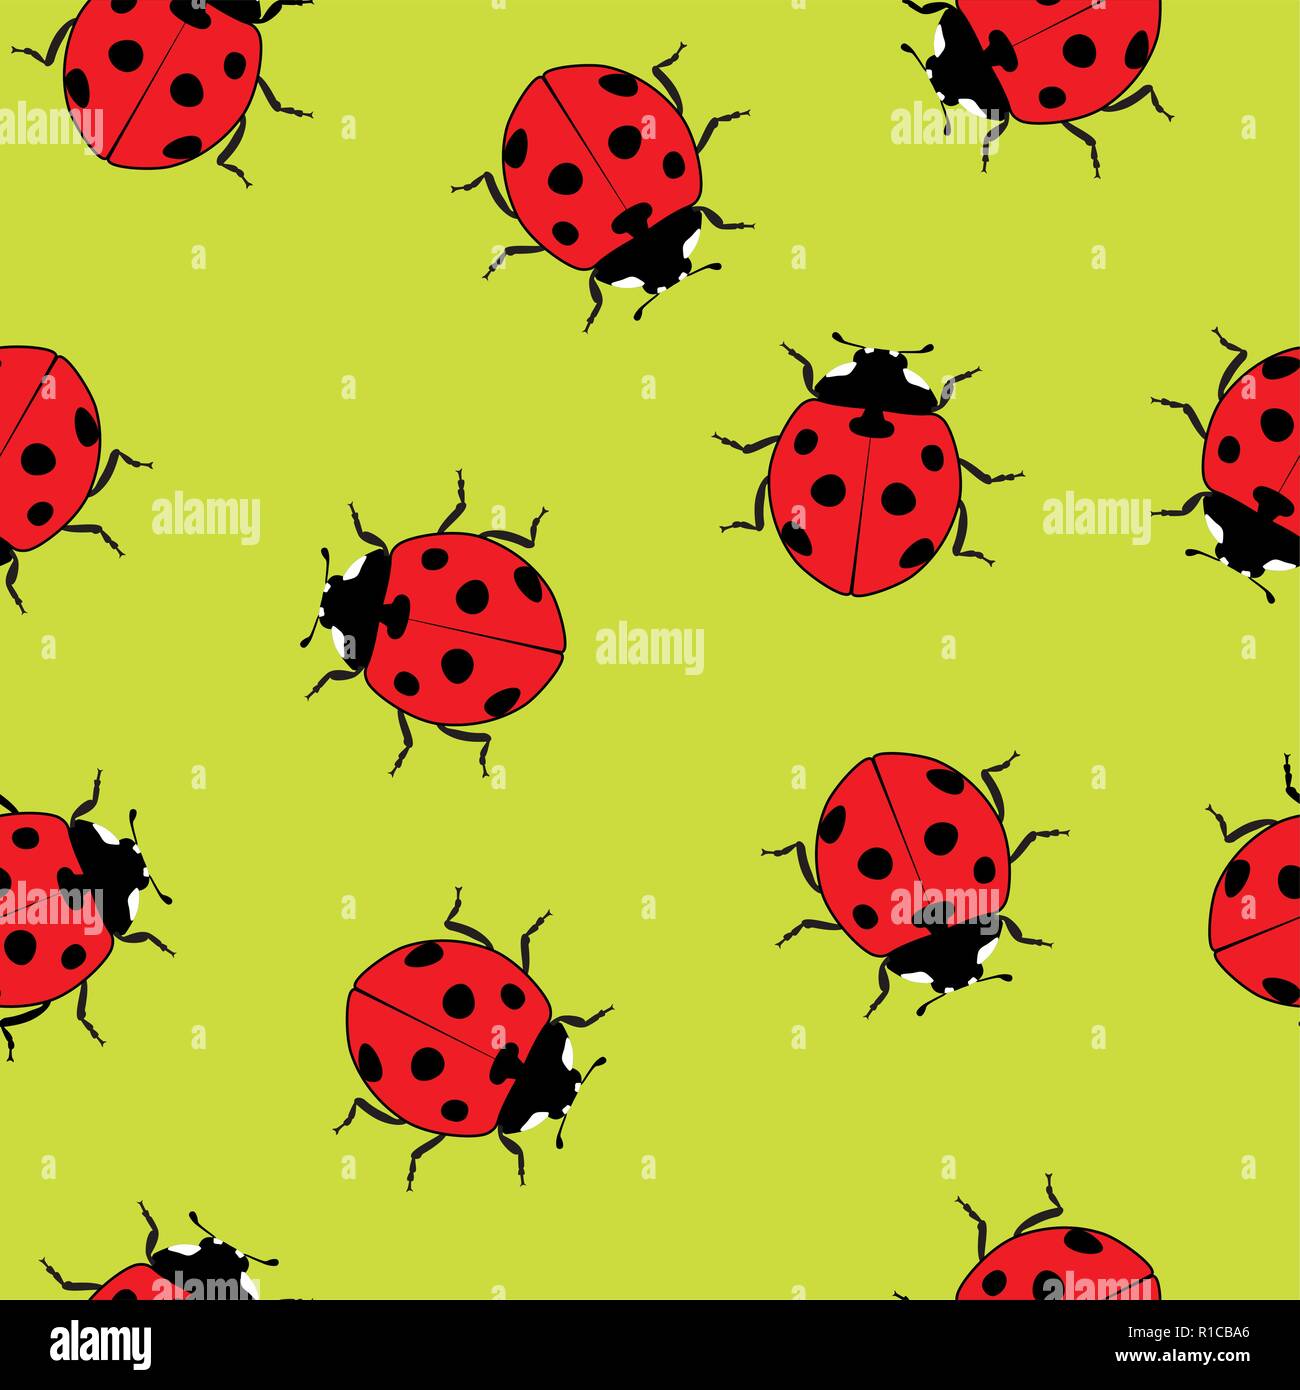 vector ladybug seamless pattern. red ladybird cartoon symbols on green background. cute dotted lady bug summer illustration Stock Vector